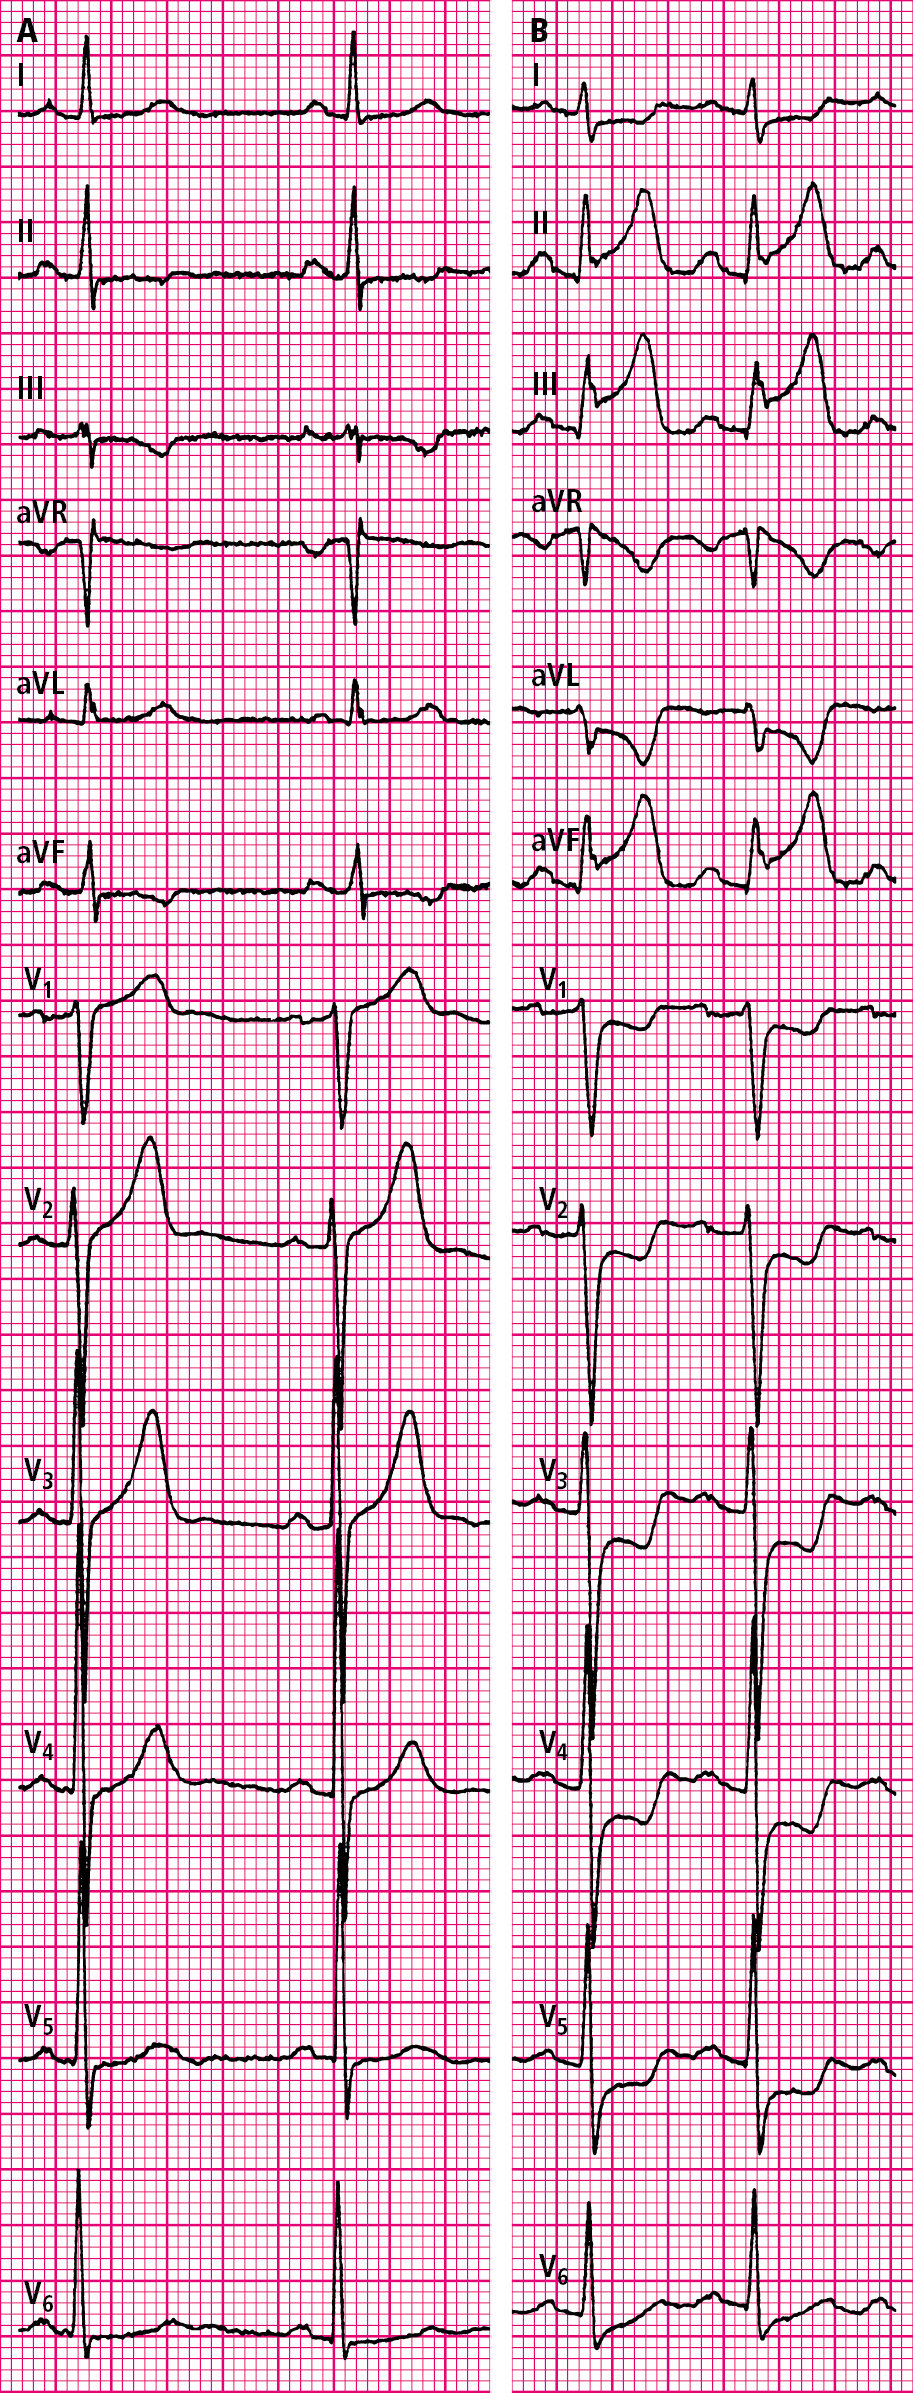 Figure 031_5336.  Electrocardiography (ECG) of a patient with vasospastic angina in a pain-free state ( A ) and during a pain episode ( B ).  Figure courtesy of Dr Tomasz Pasierski.  